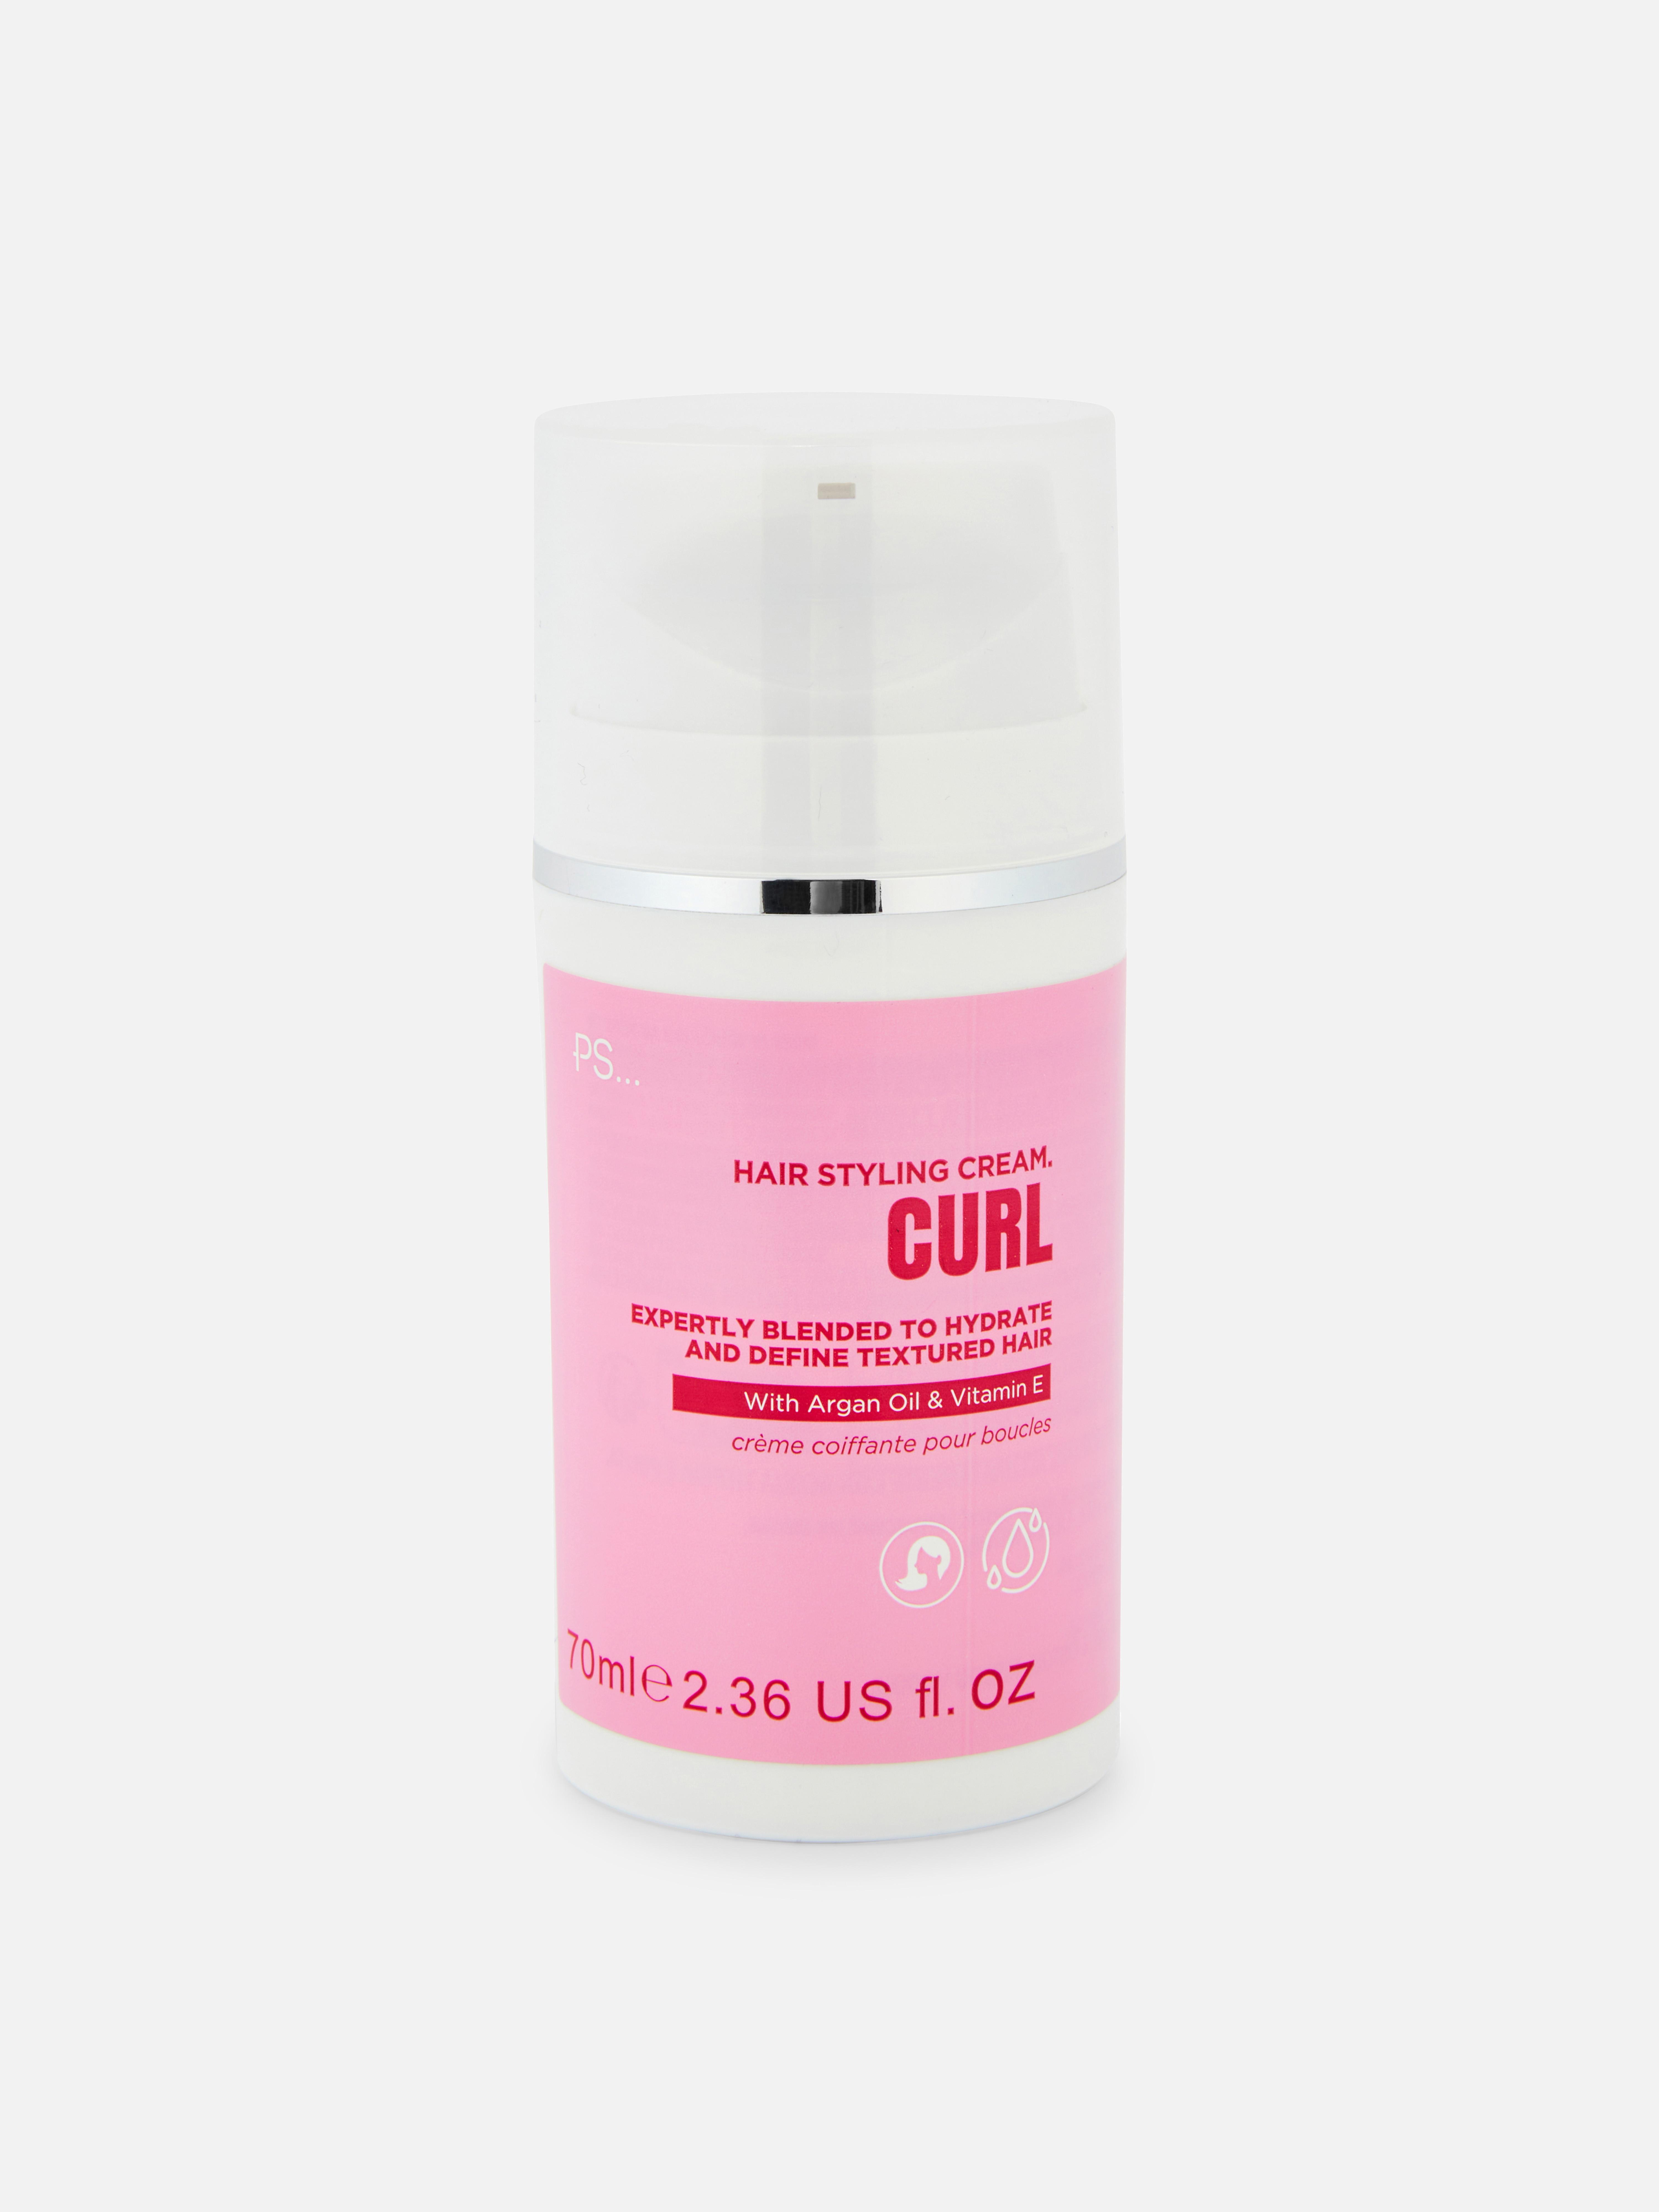 PS... Curl Hair Styling Cream